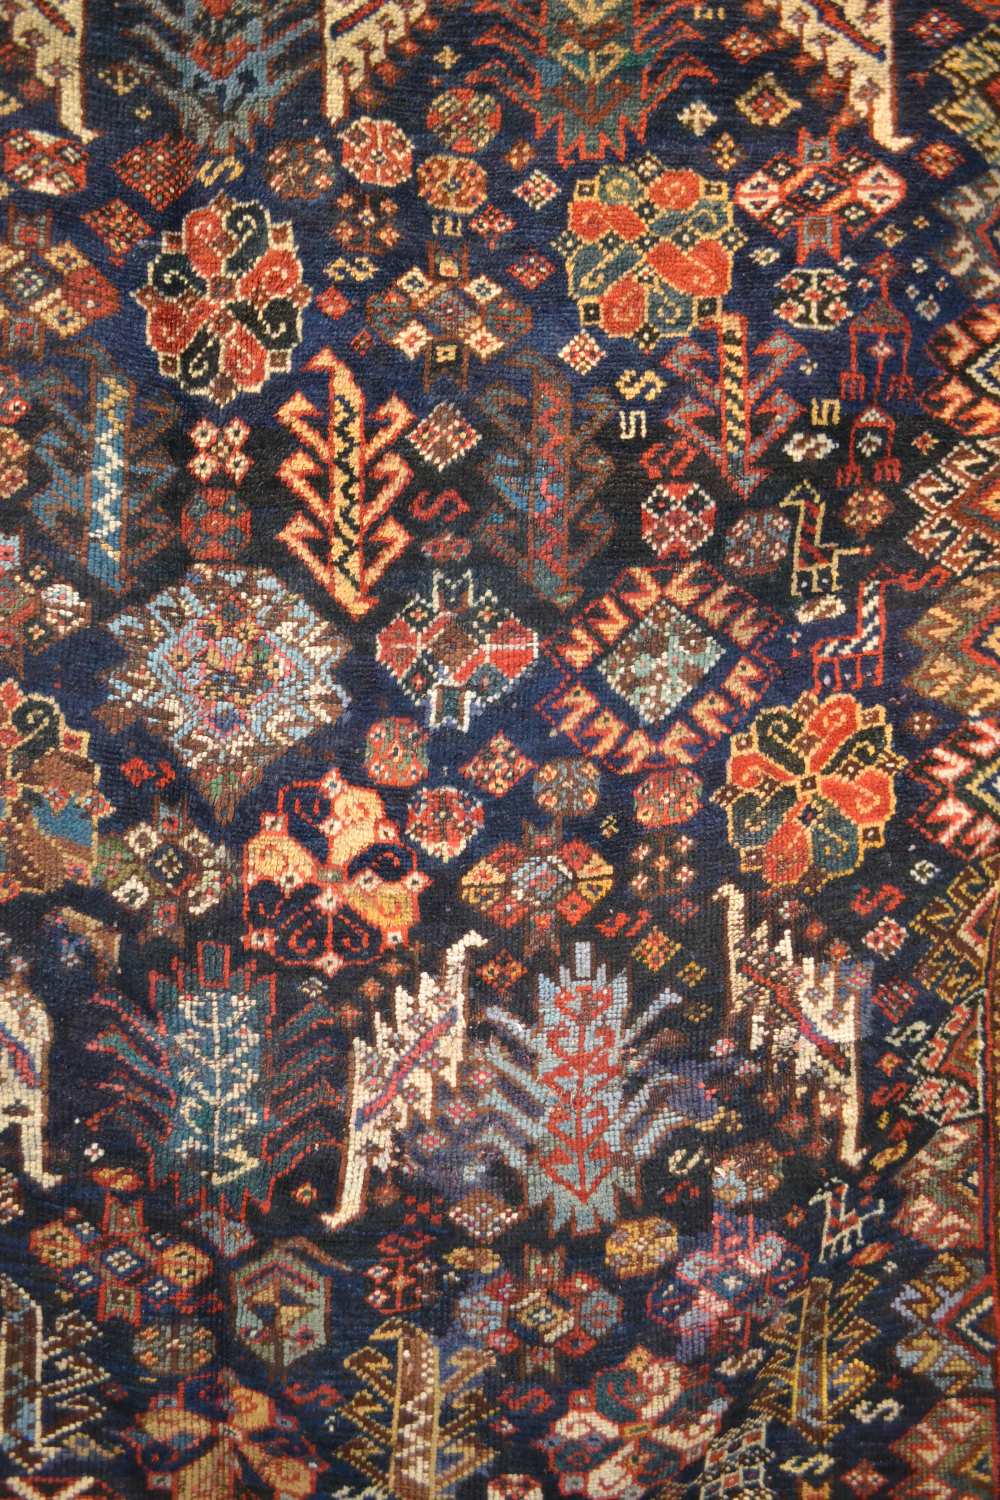 Good Luri rug, Fars, south west Persia, late 19th/early 20th century, 8ft. 5in. x 5ft. 9in. 2.56m. x - Image 7 of 7